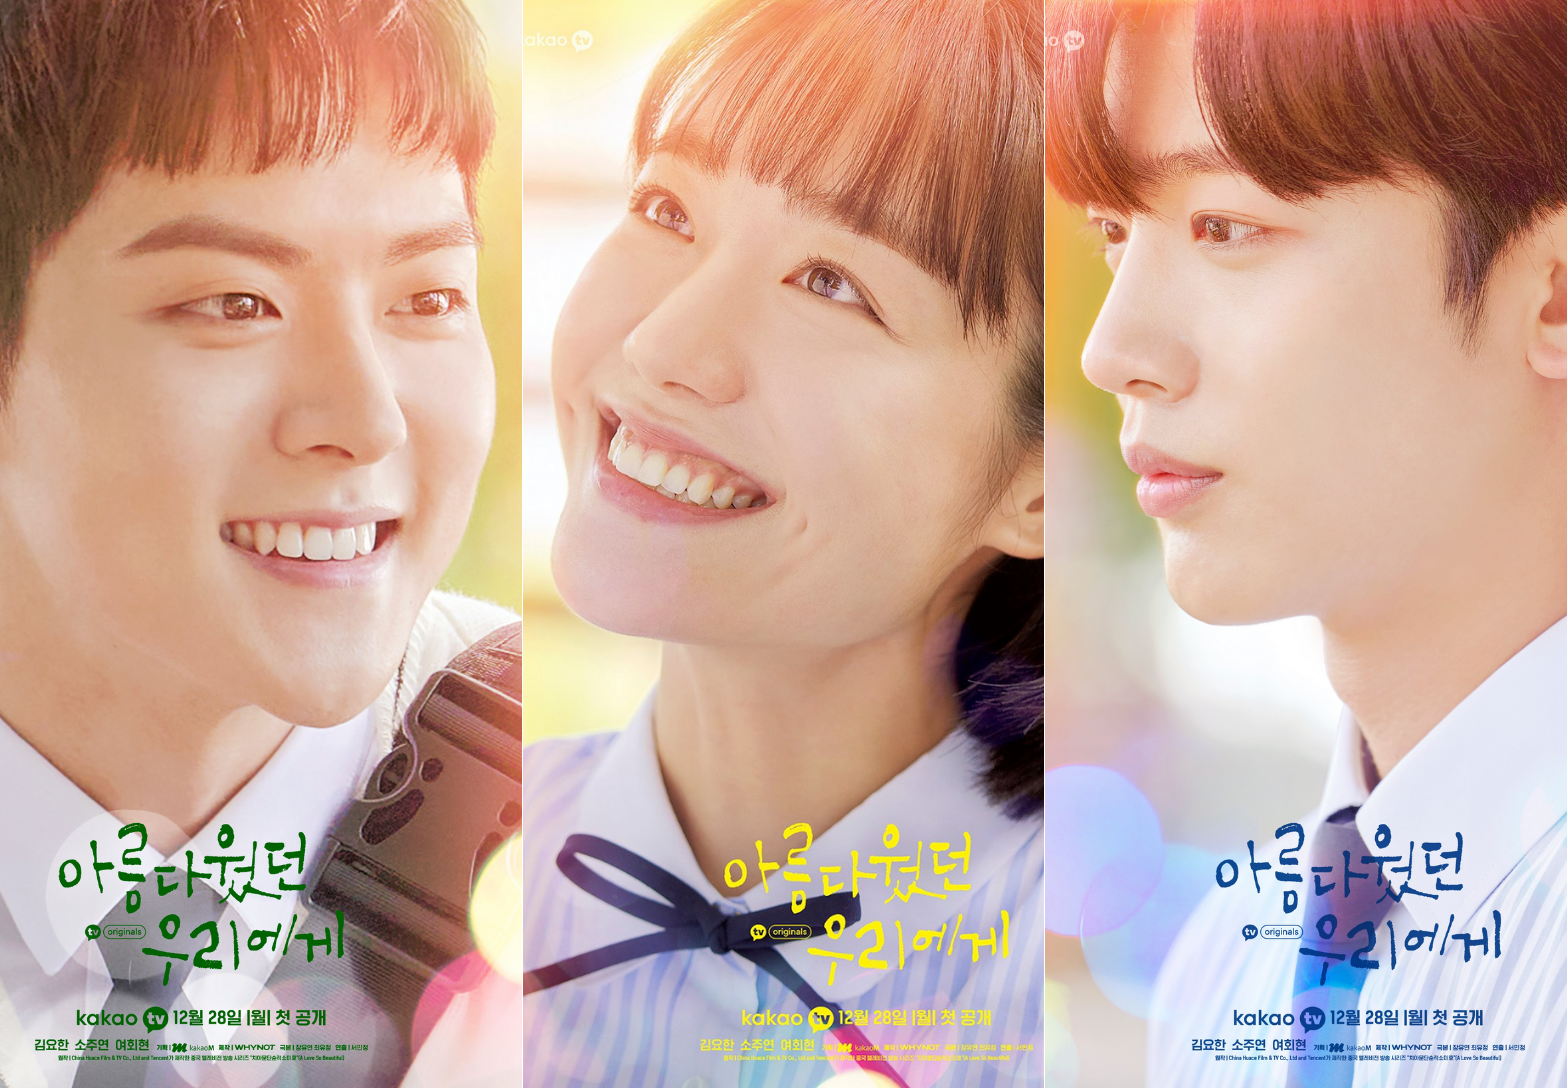 KakaoTV released A Love So Beautiful character posters